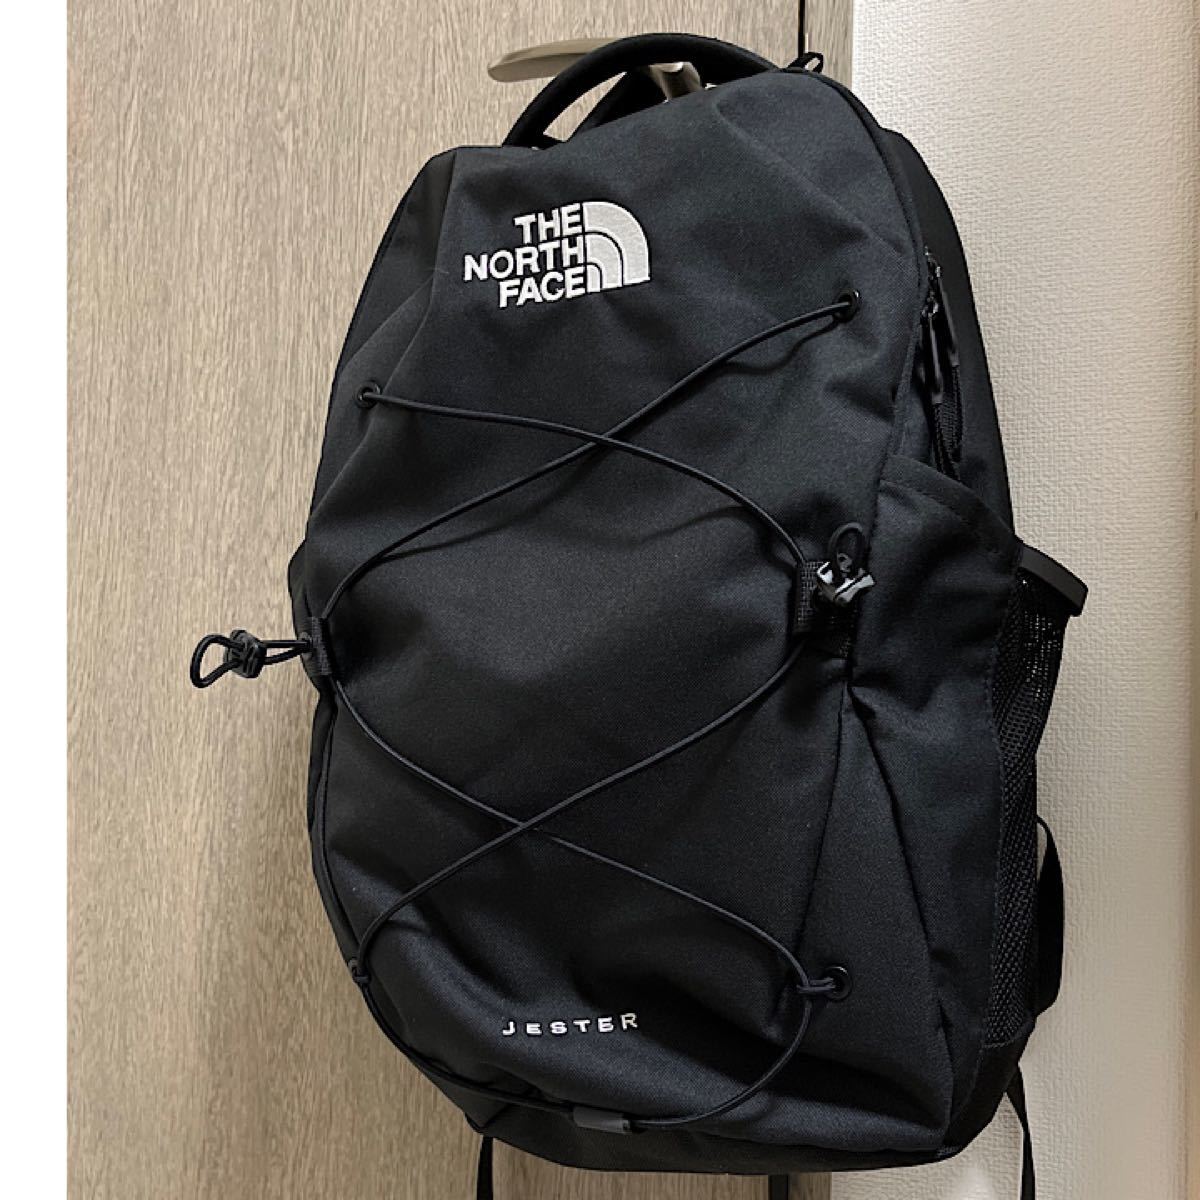 JESTER THE NORTH FACE バックパック 黒